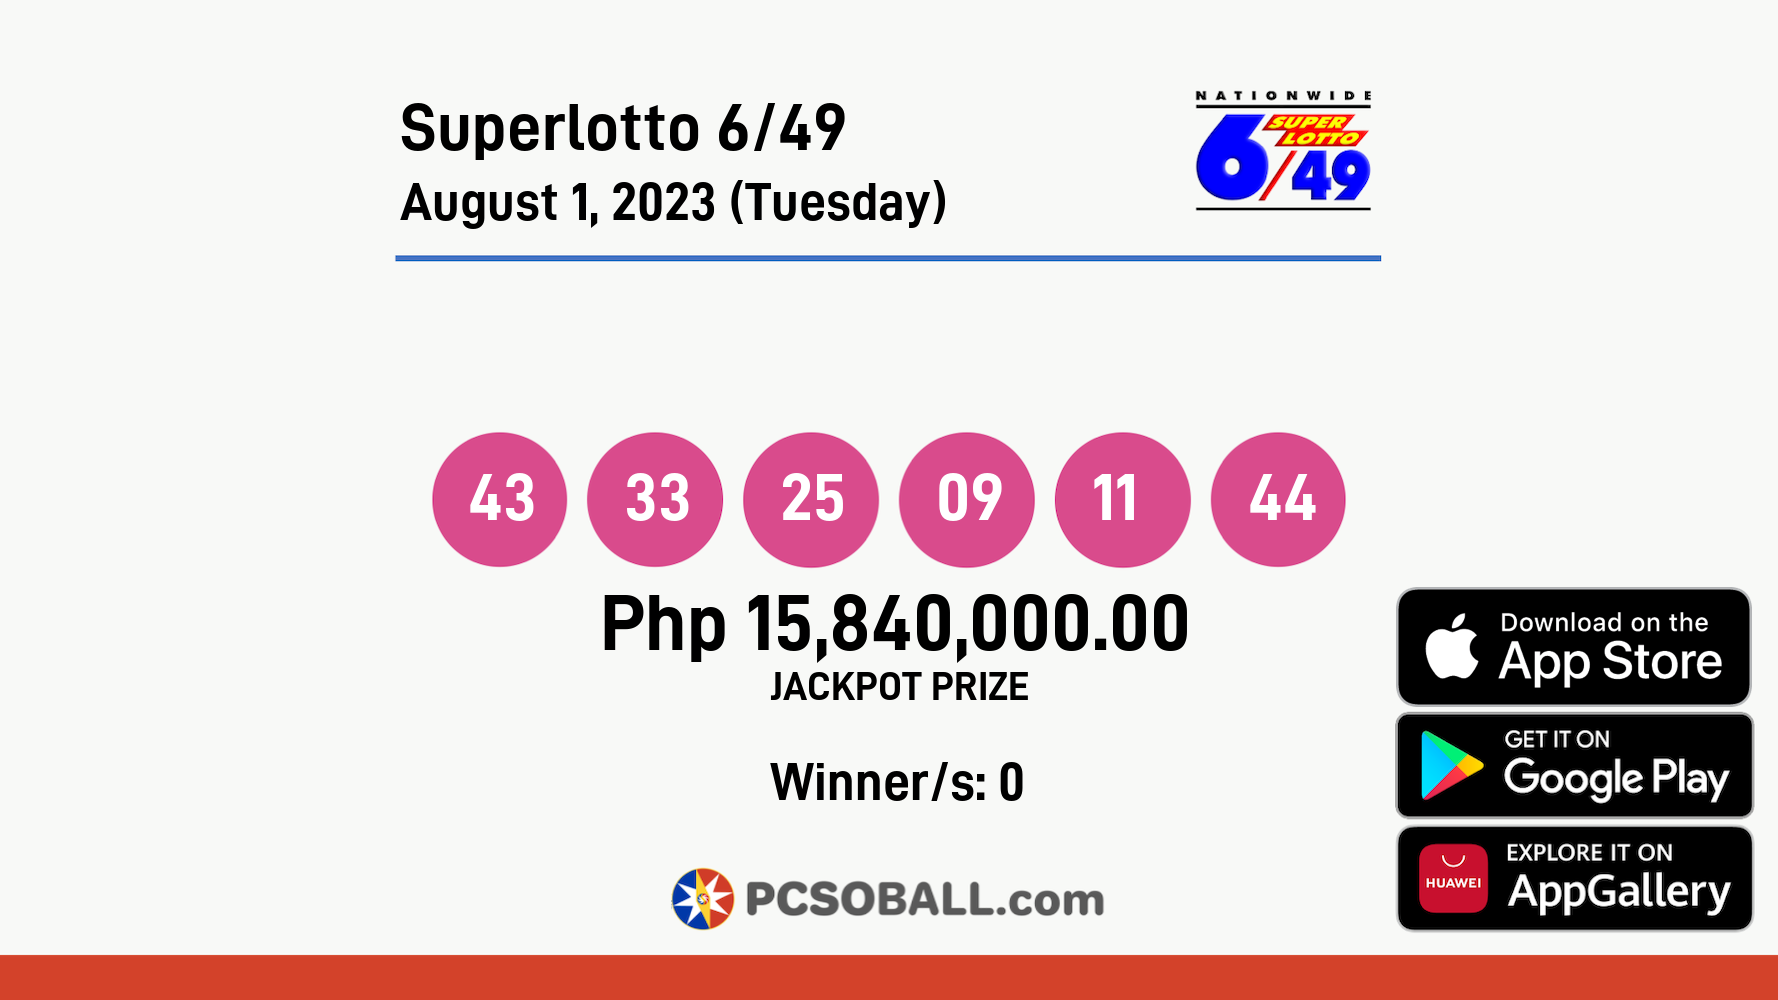 Superlotto 6/49 August 1, 2023 (Tuesday) Result